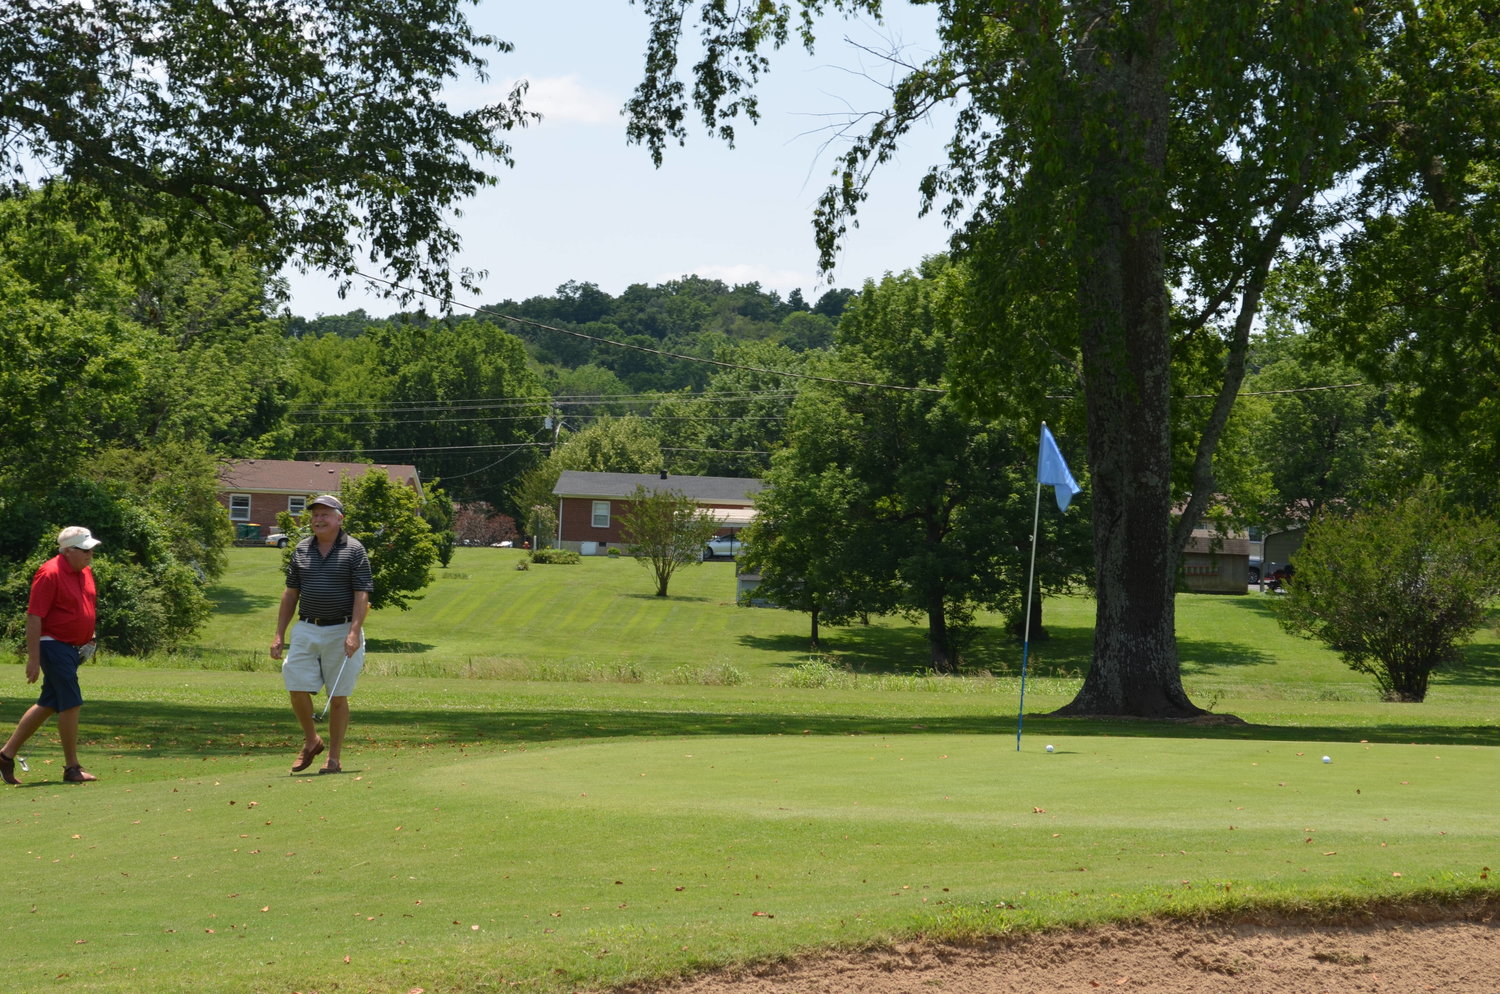 Kendall Hollingsworth (left) and Jack Freeland approaching the No. 6 green during the Lewisburg Rotary Golf Tournament